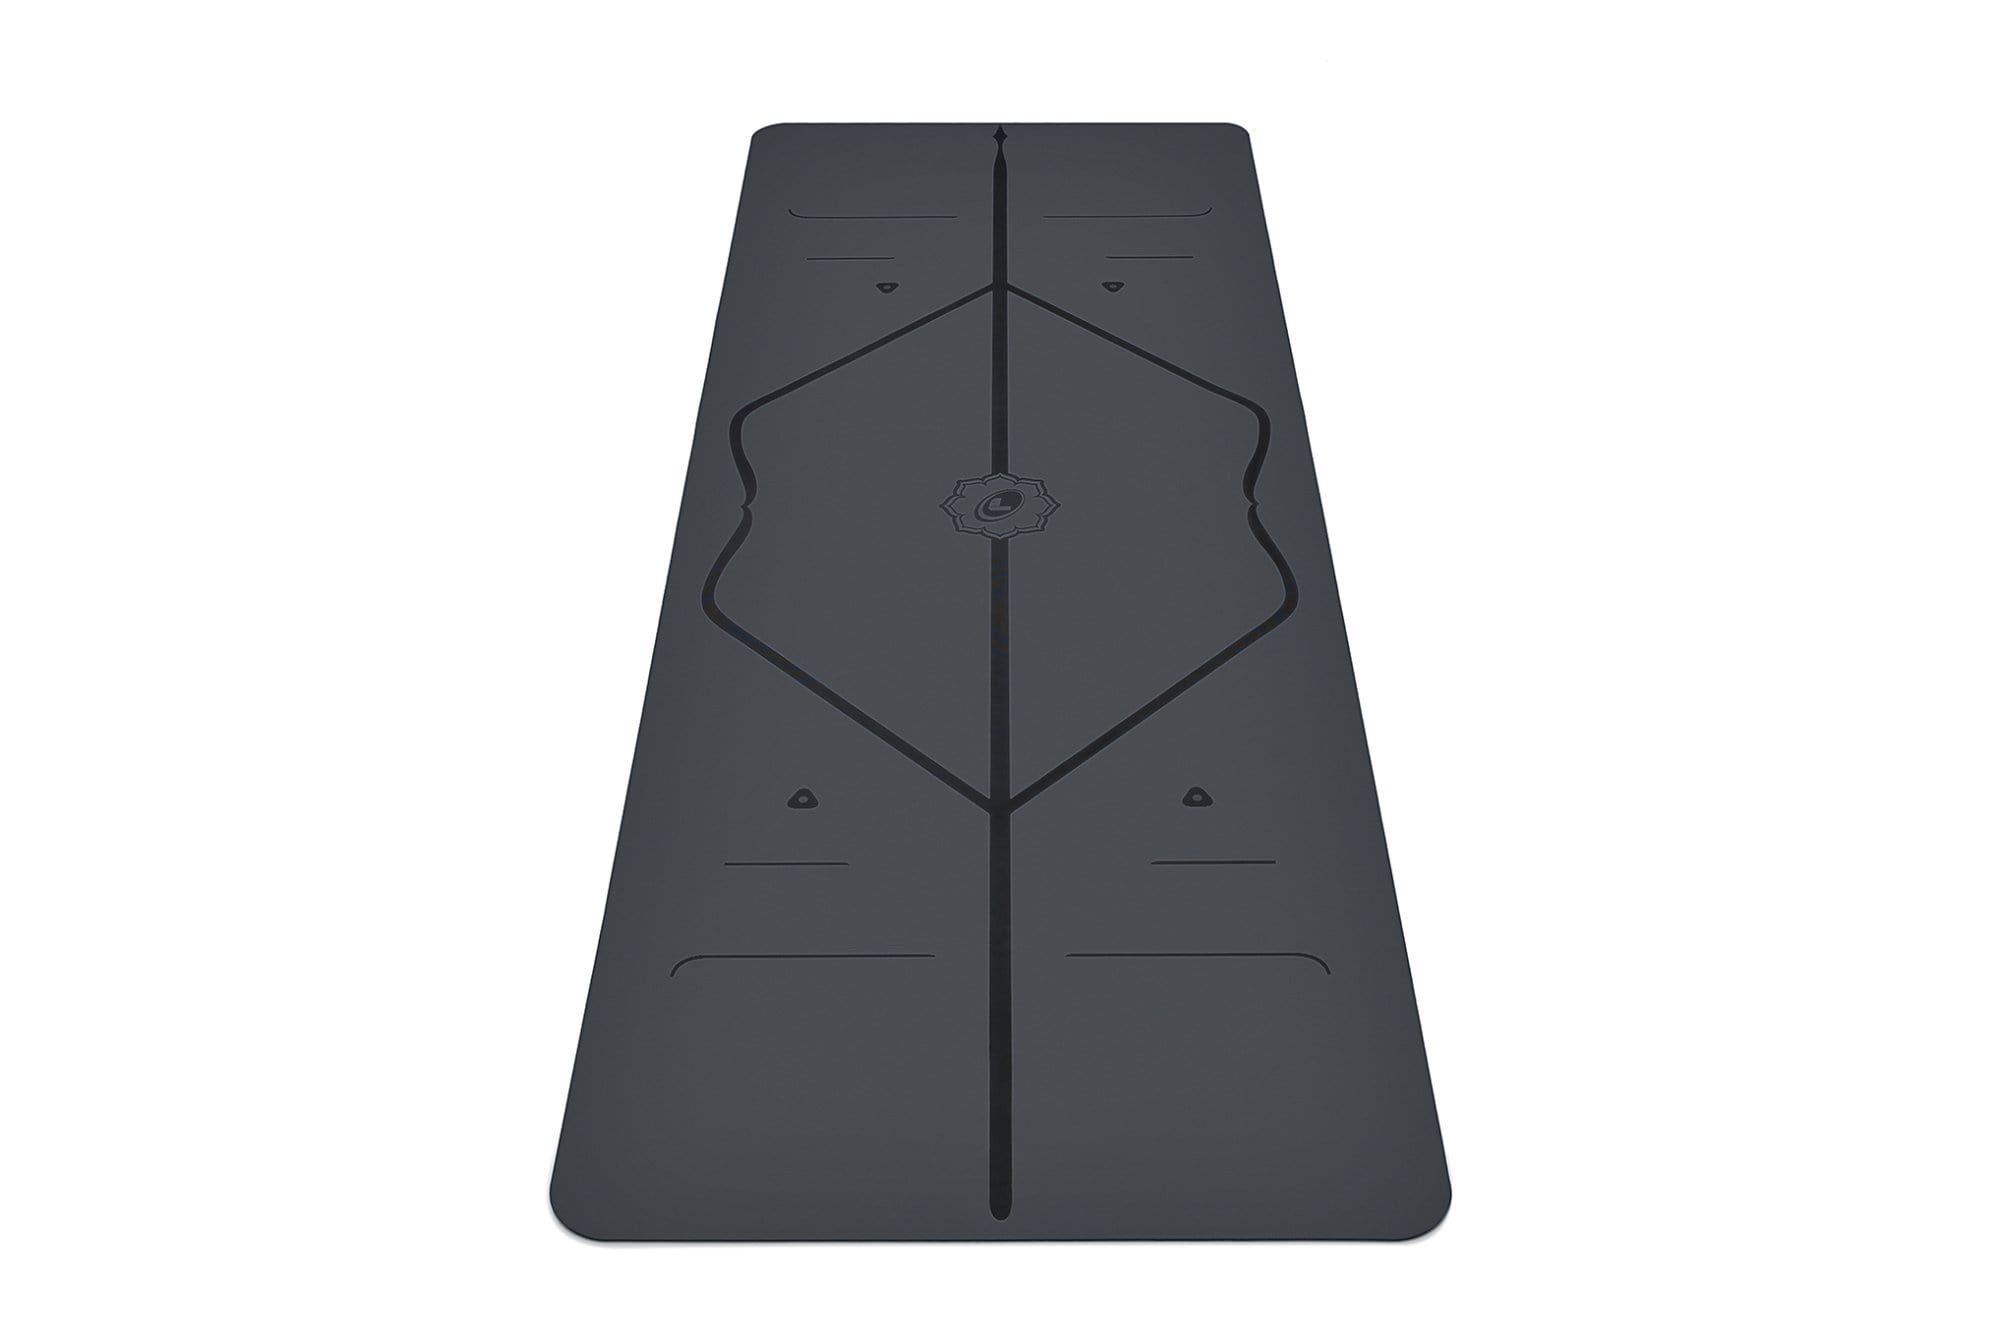 Portrait view of grey Yoga mat from Liforme